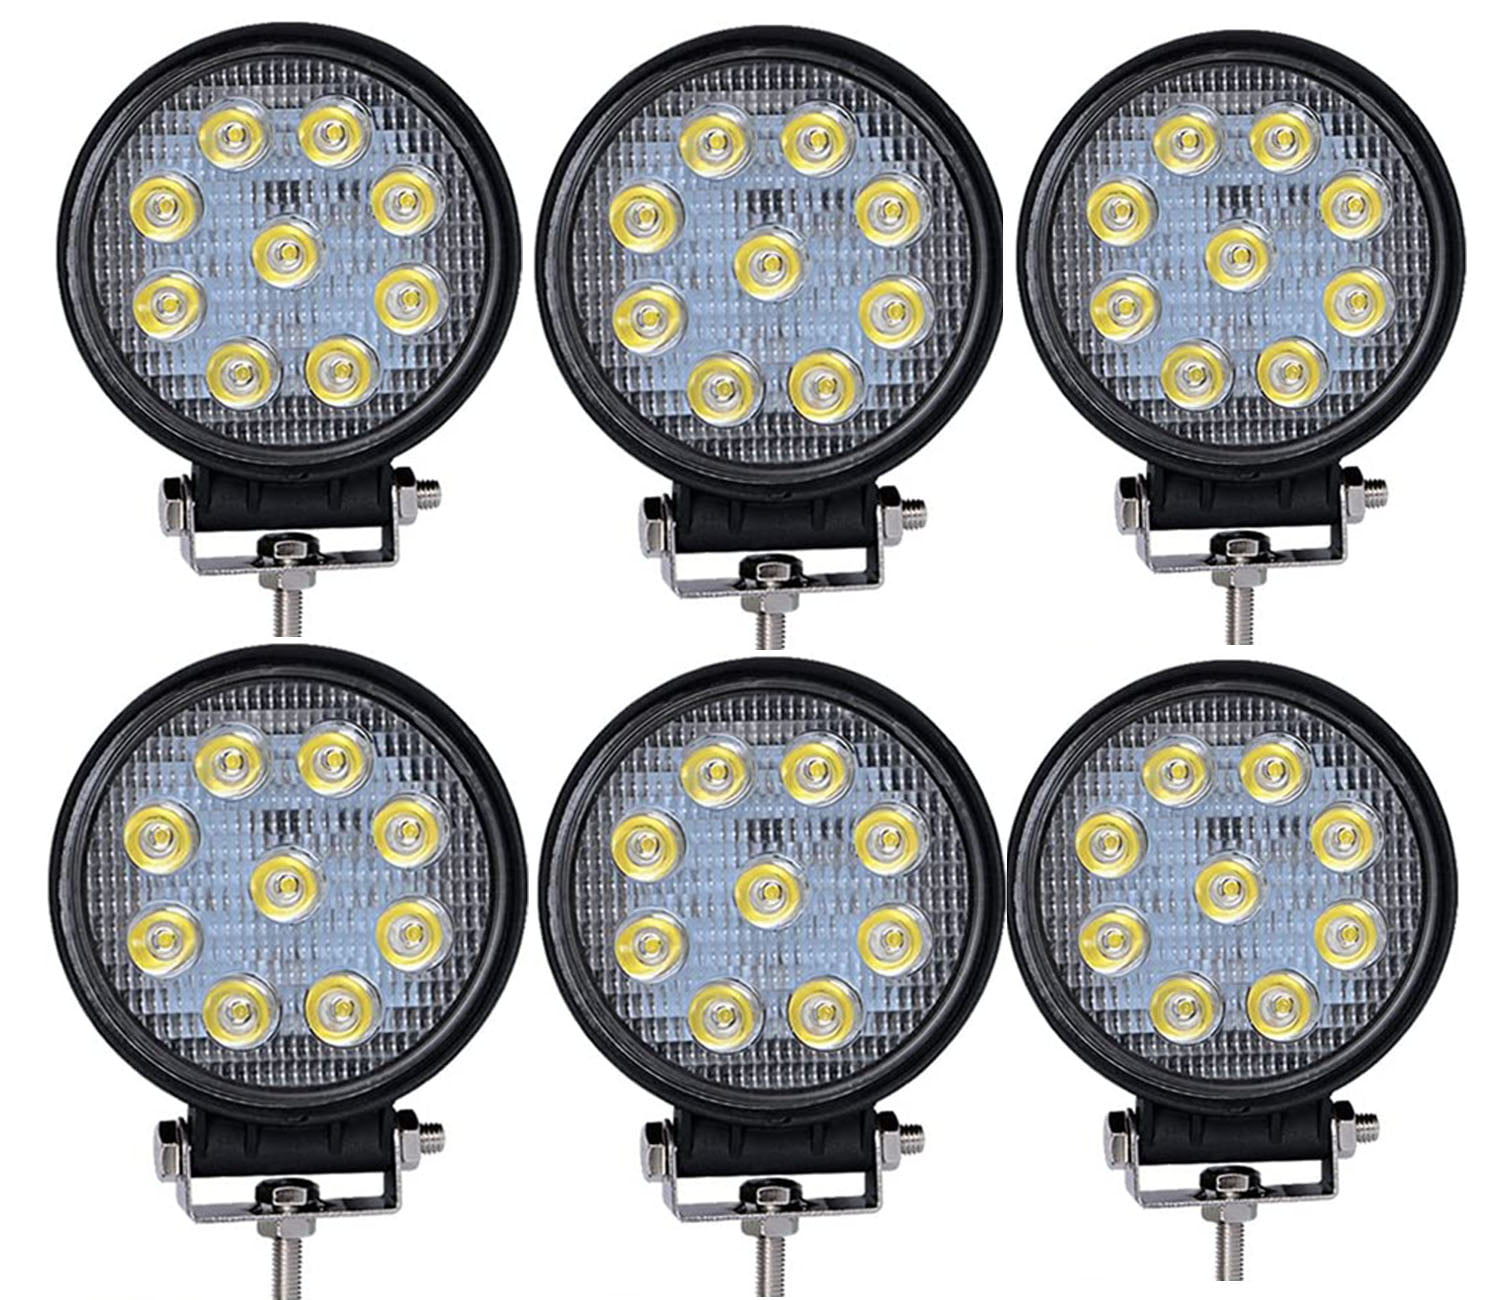 Work Light Bar LED Flood Spot Lamp FOR ATV Offroad TRUCK CAR 4WD SUV BOAT Jeep